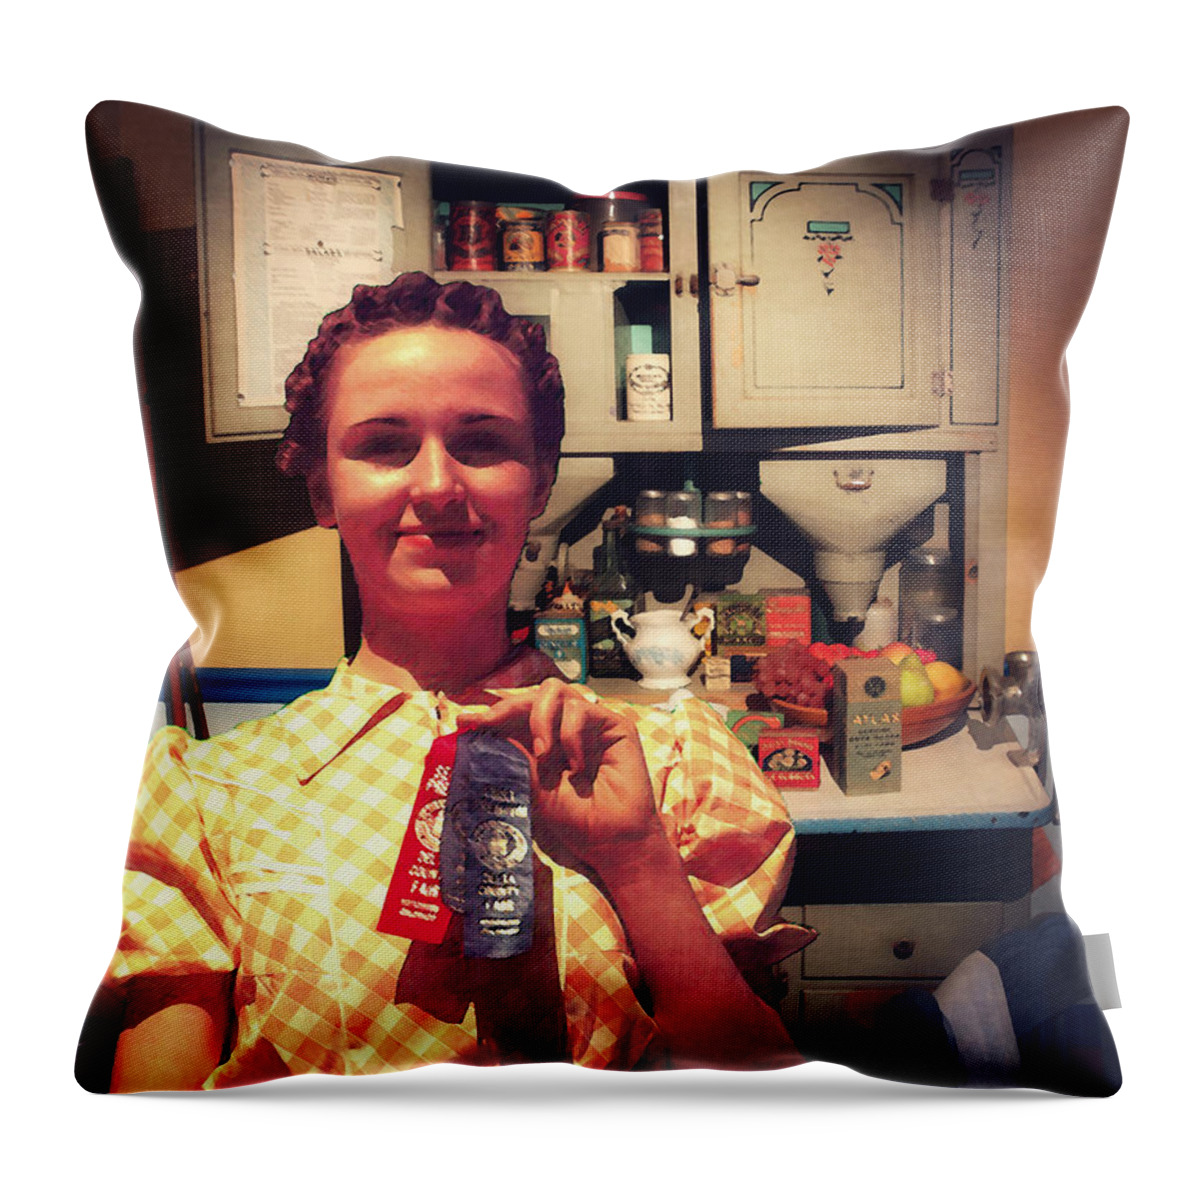 Composite Throw Pillow featuring the photograph The Ribbon Winner by Timothy Bulone